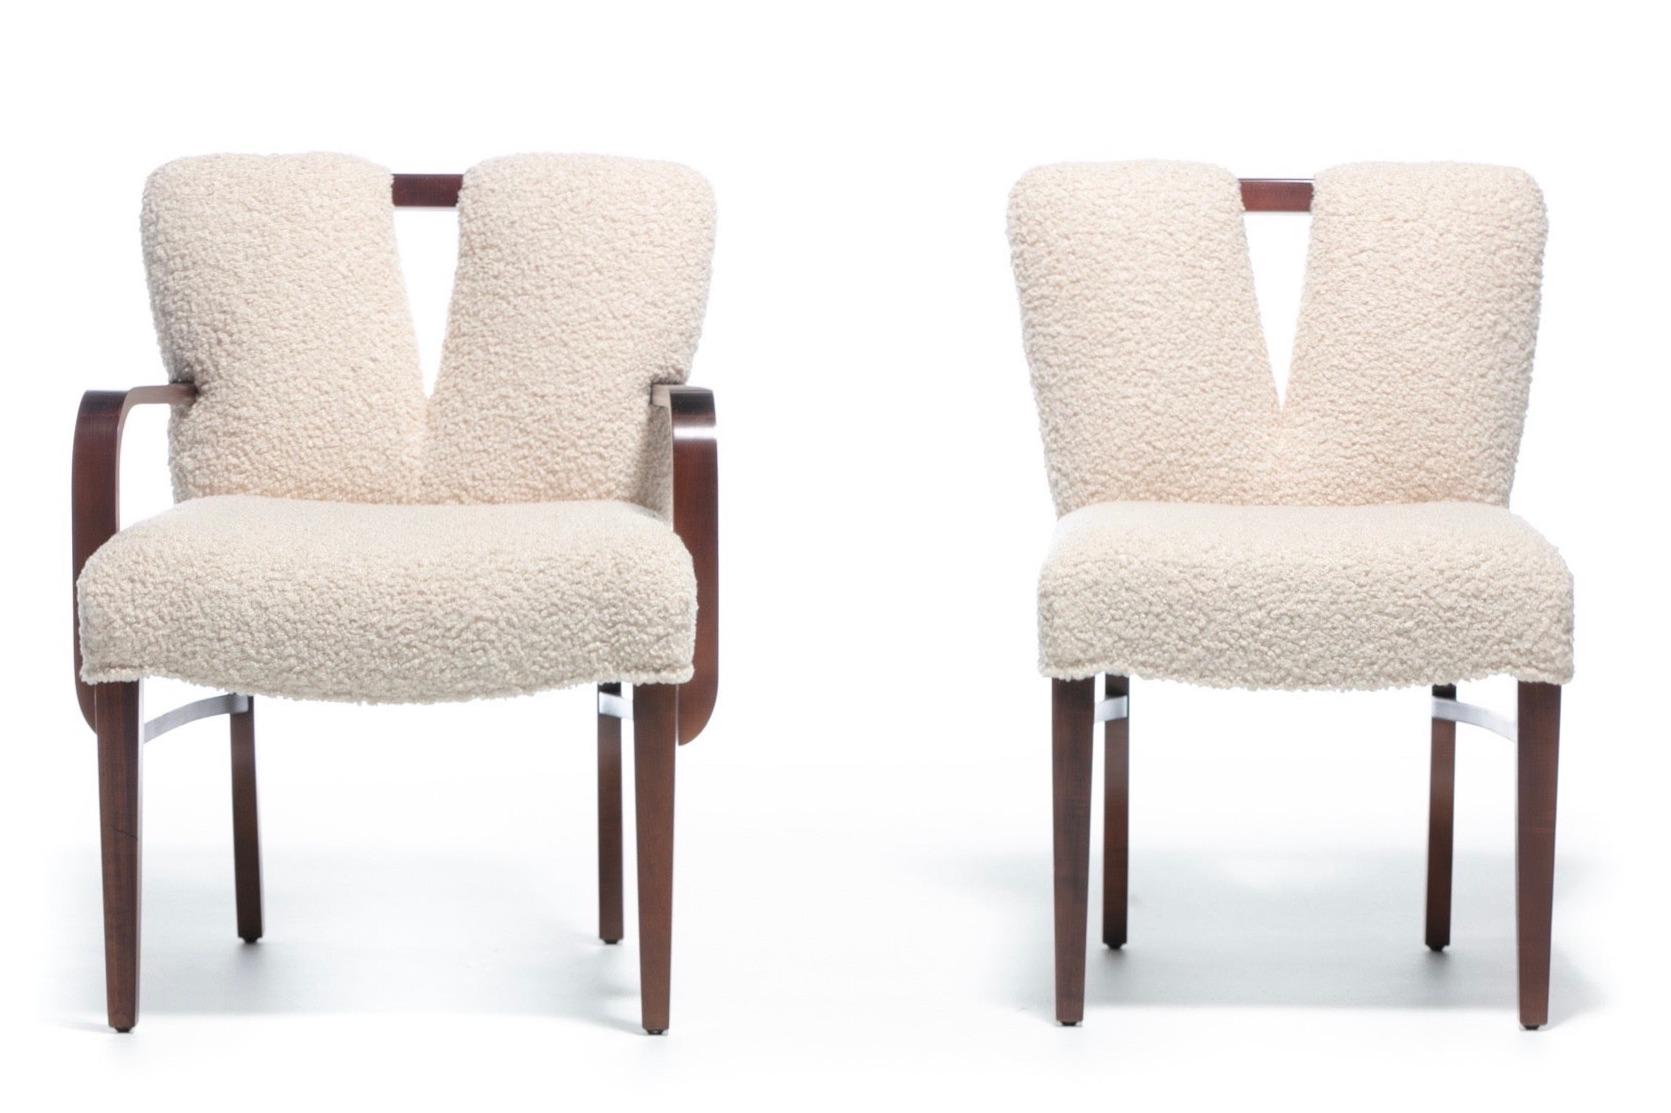 We are pleased to offer this one of a kind exquisitely large set of 14 Paul Frankl plunging corset dining chairs for Johnson Furniture, circa 1950 professionally reupholstered in ivory white bouclé. The backs feature Frankl's iconic 